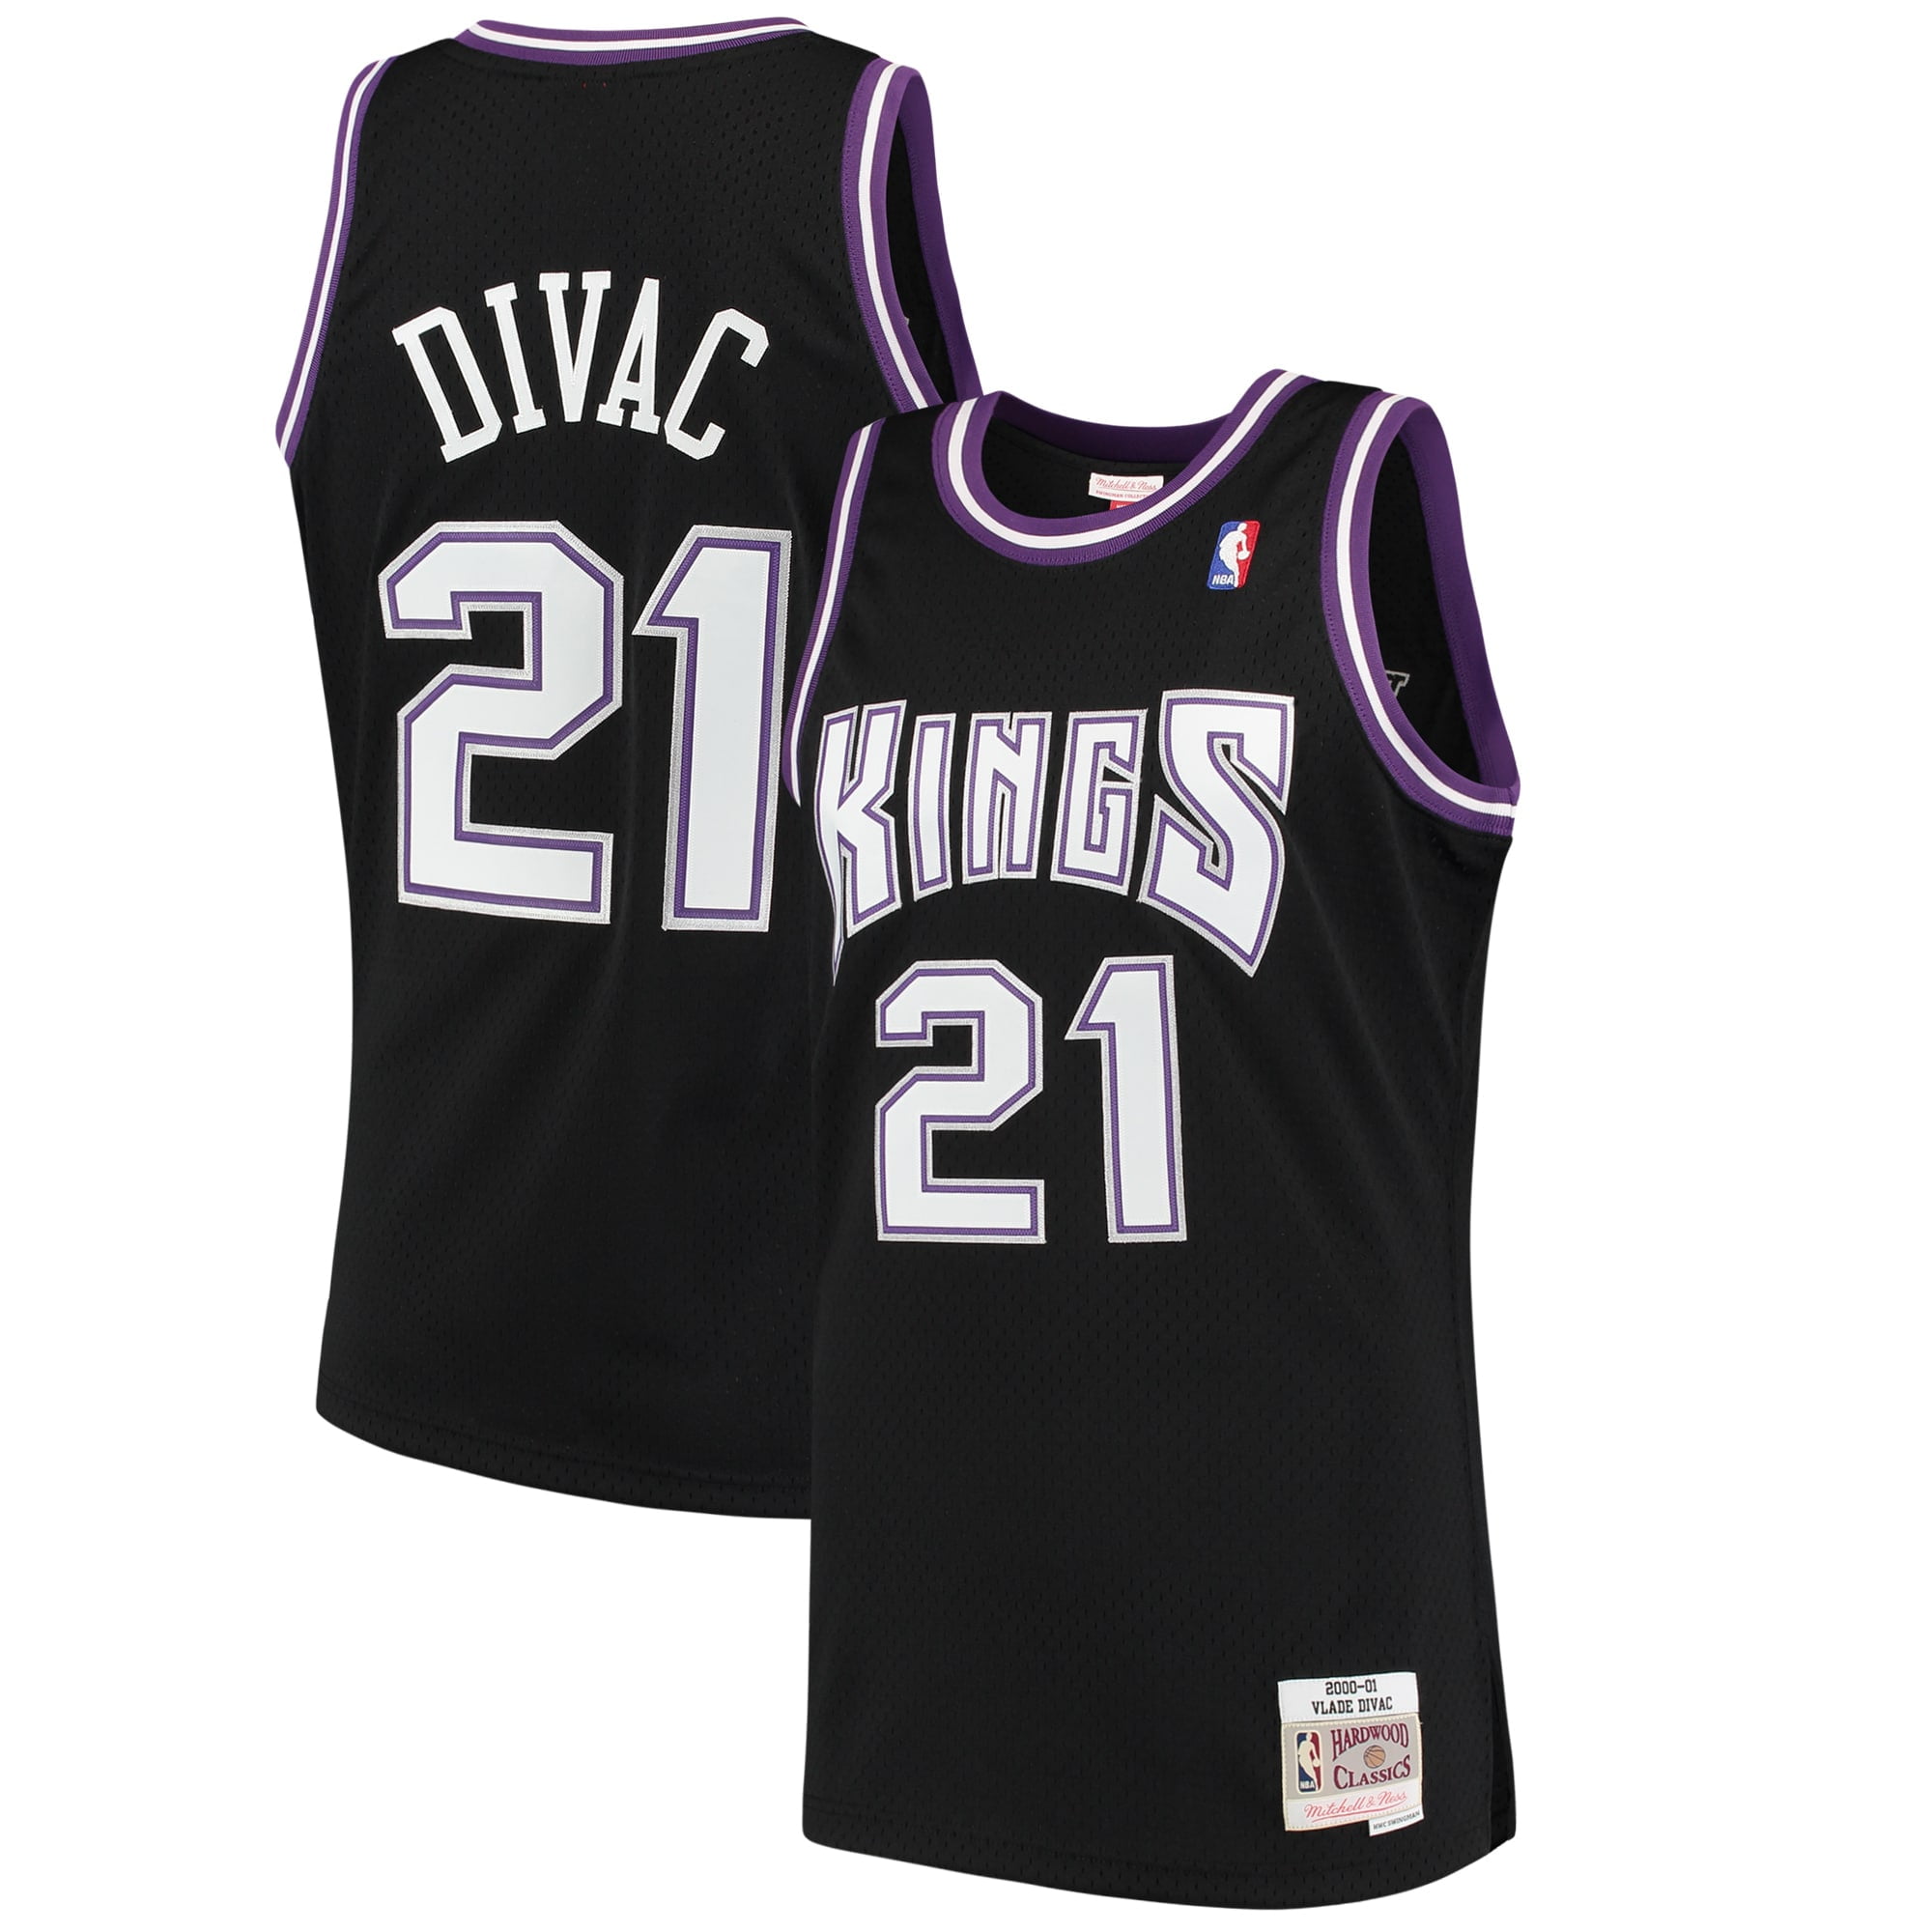 divac lakers jersey